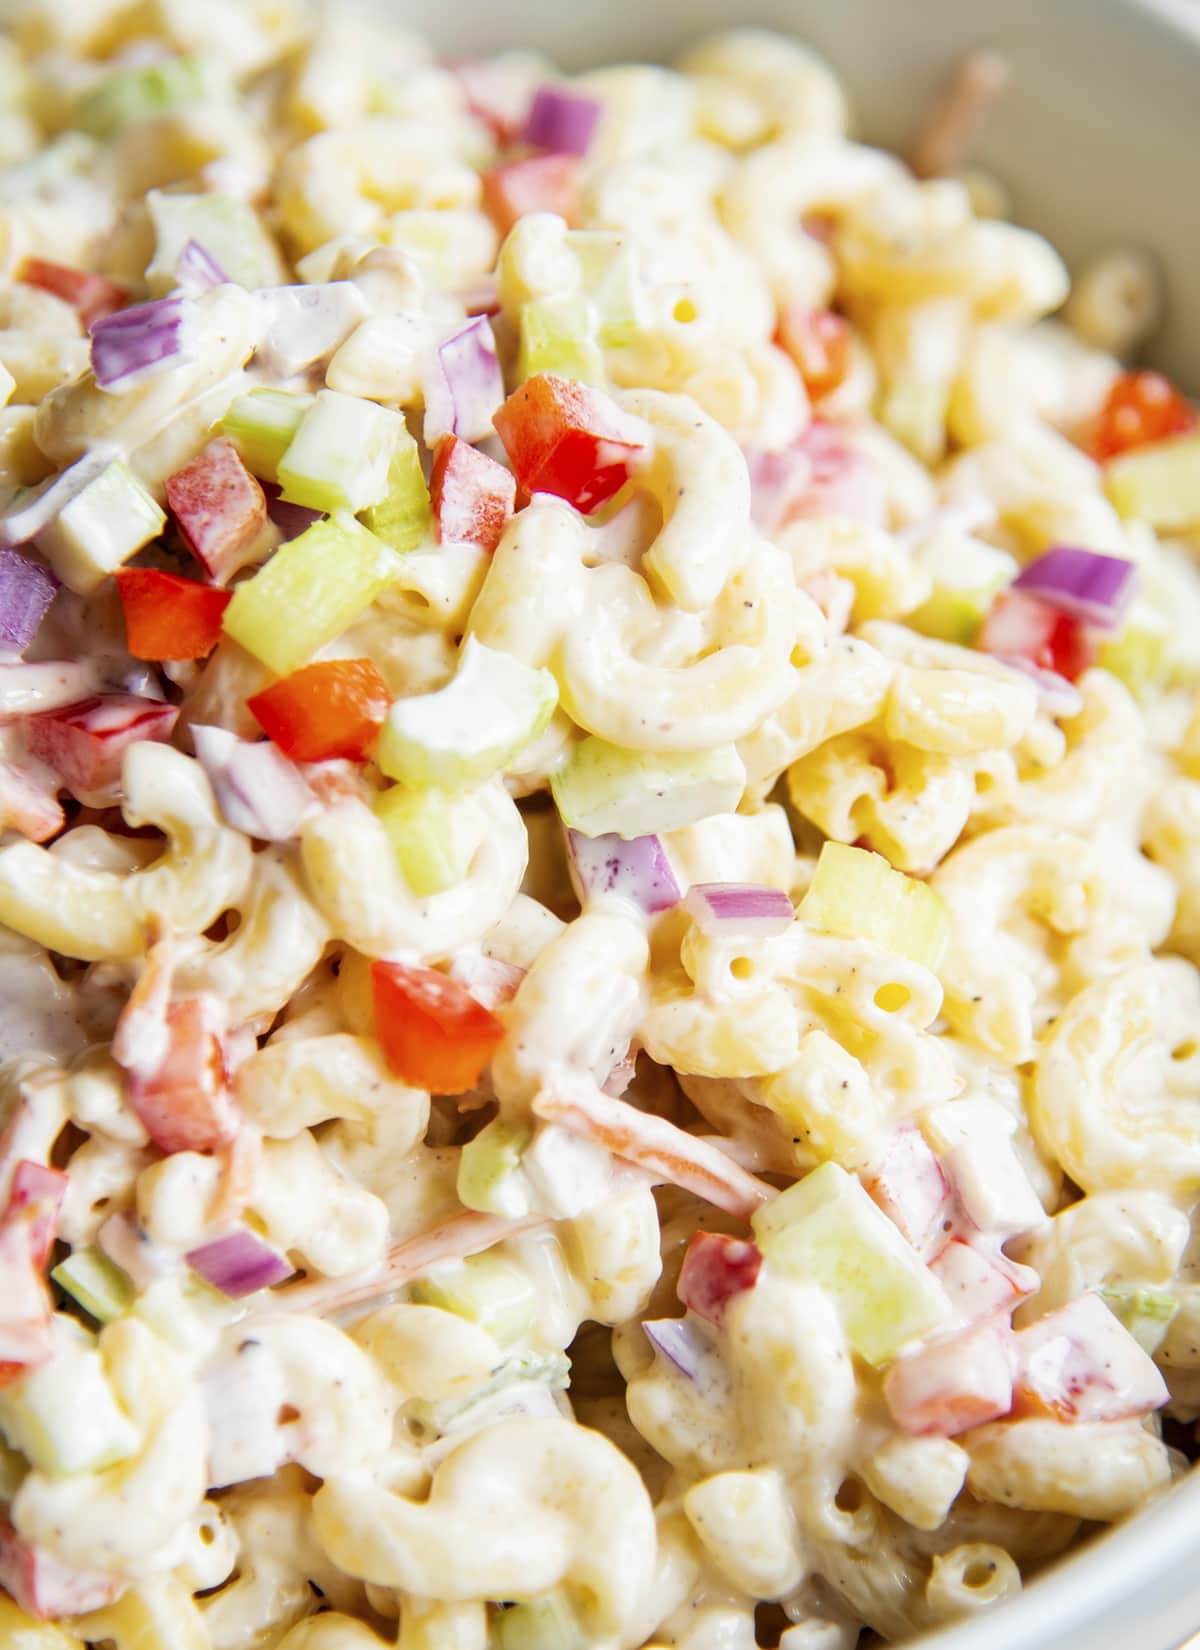 A close up of a bowl of macaroni salad with a creamy mayo dressing, and diced veggies like peppers, celery, and red onion.